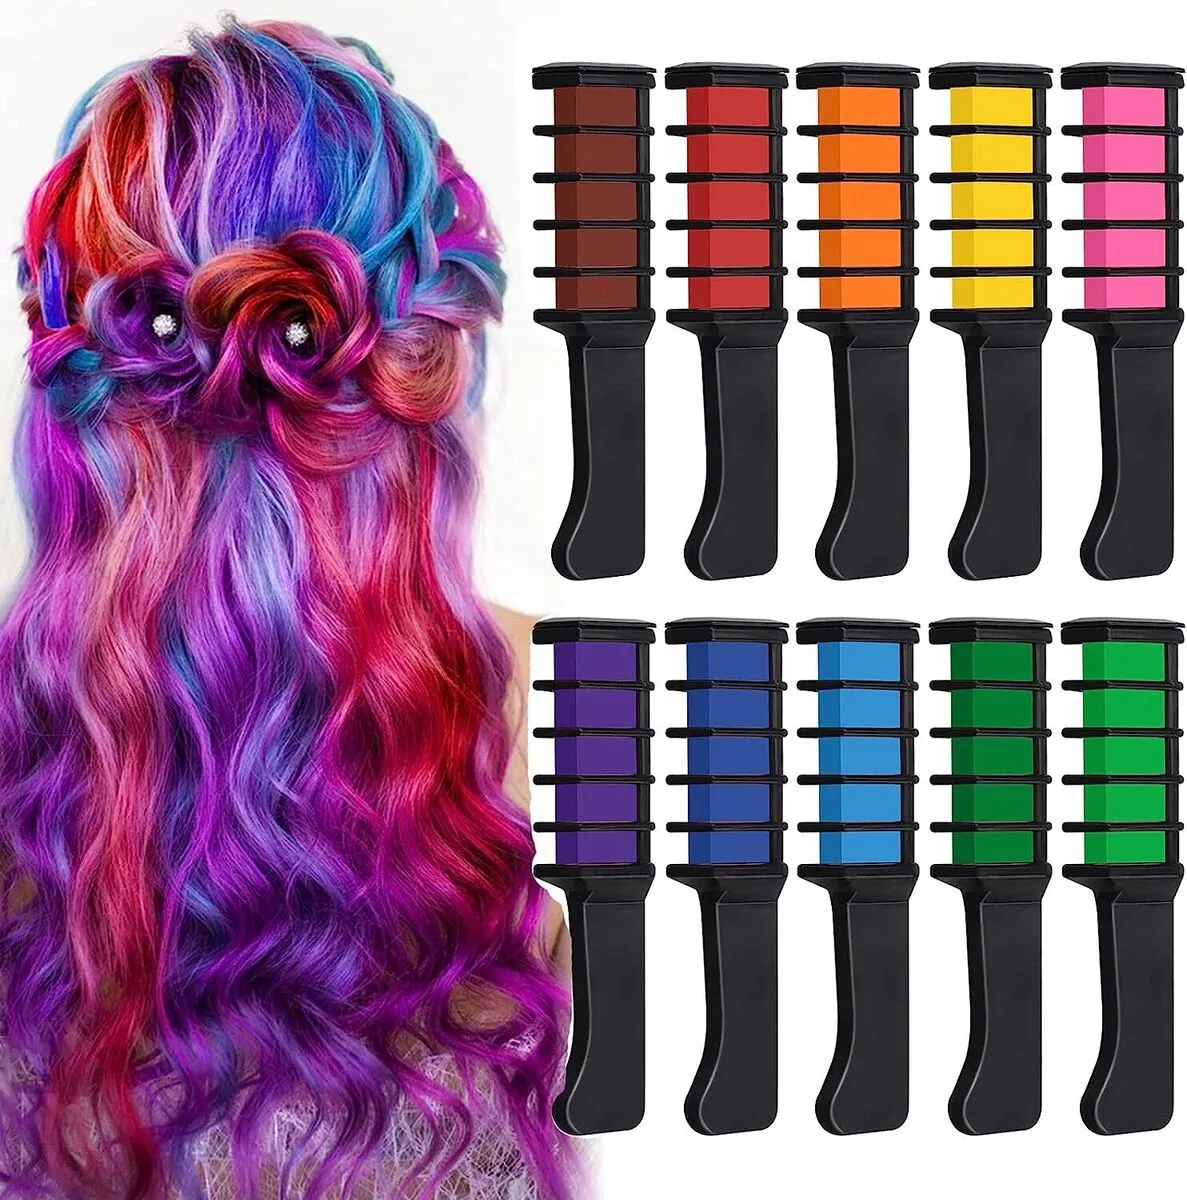 Stylish hair inspiration using Hair Chalk for unique looks.